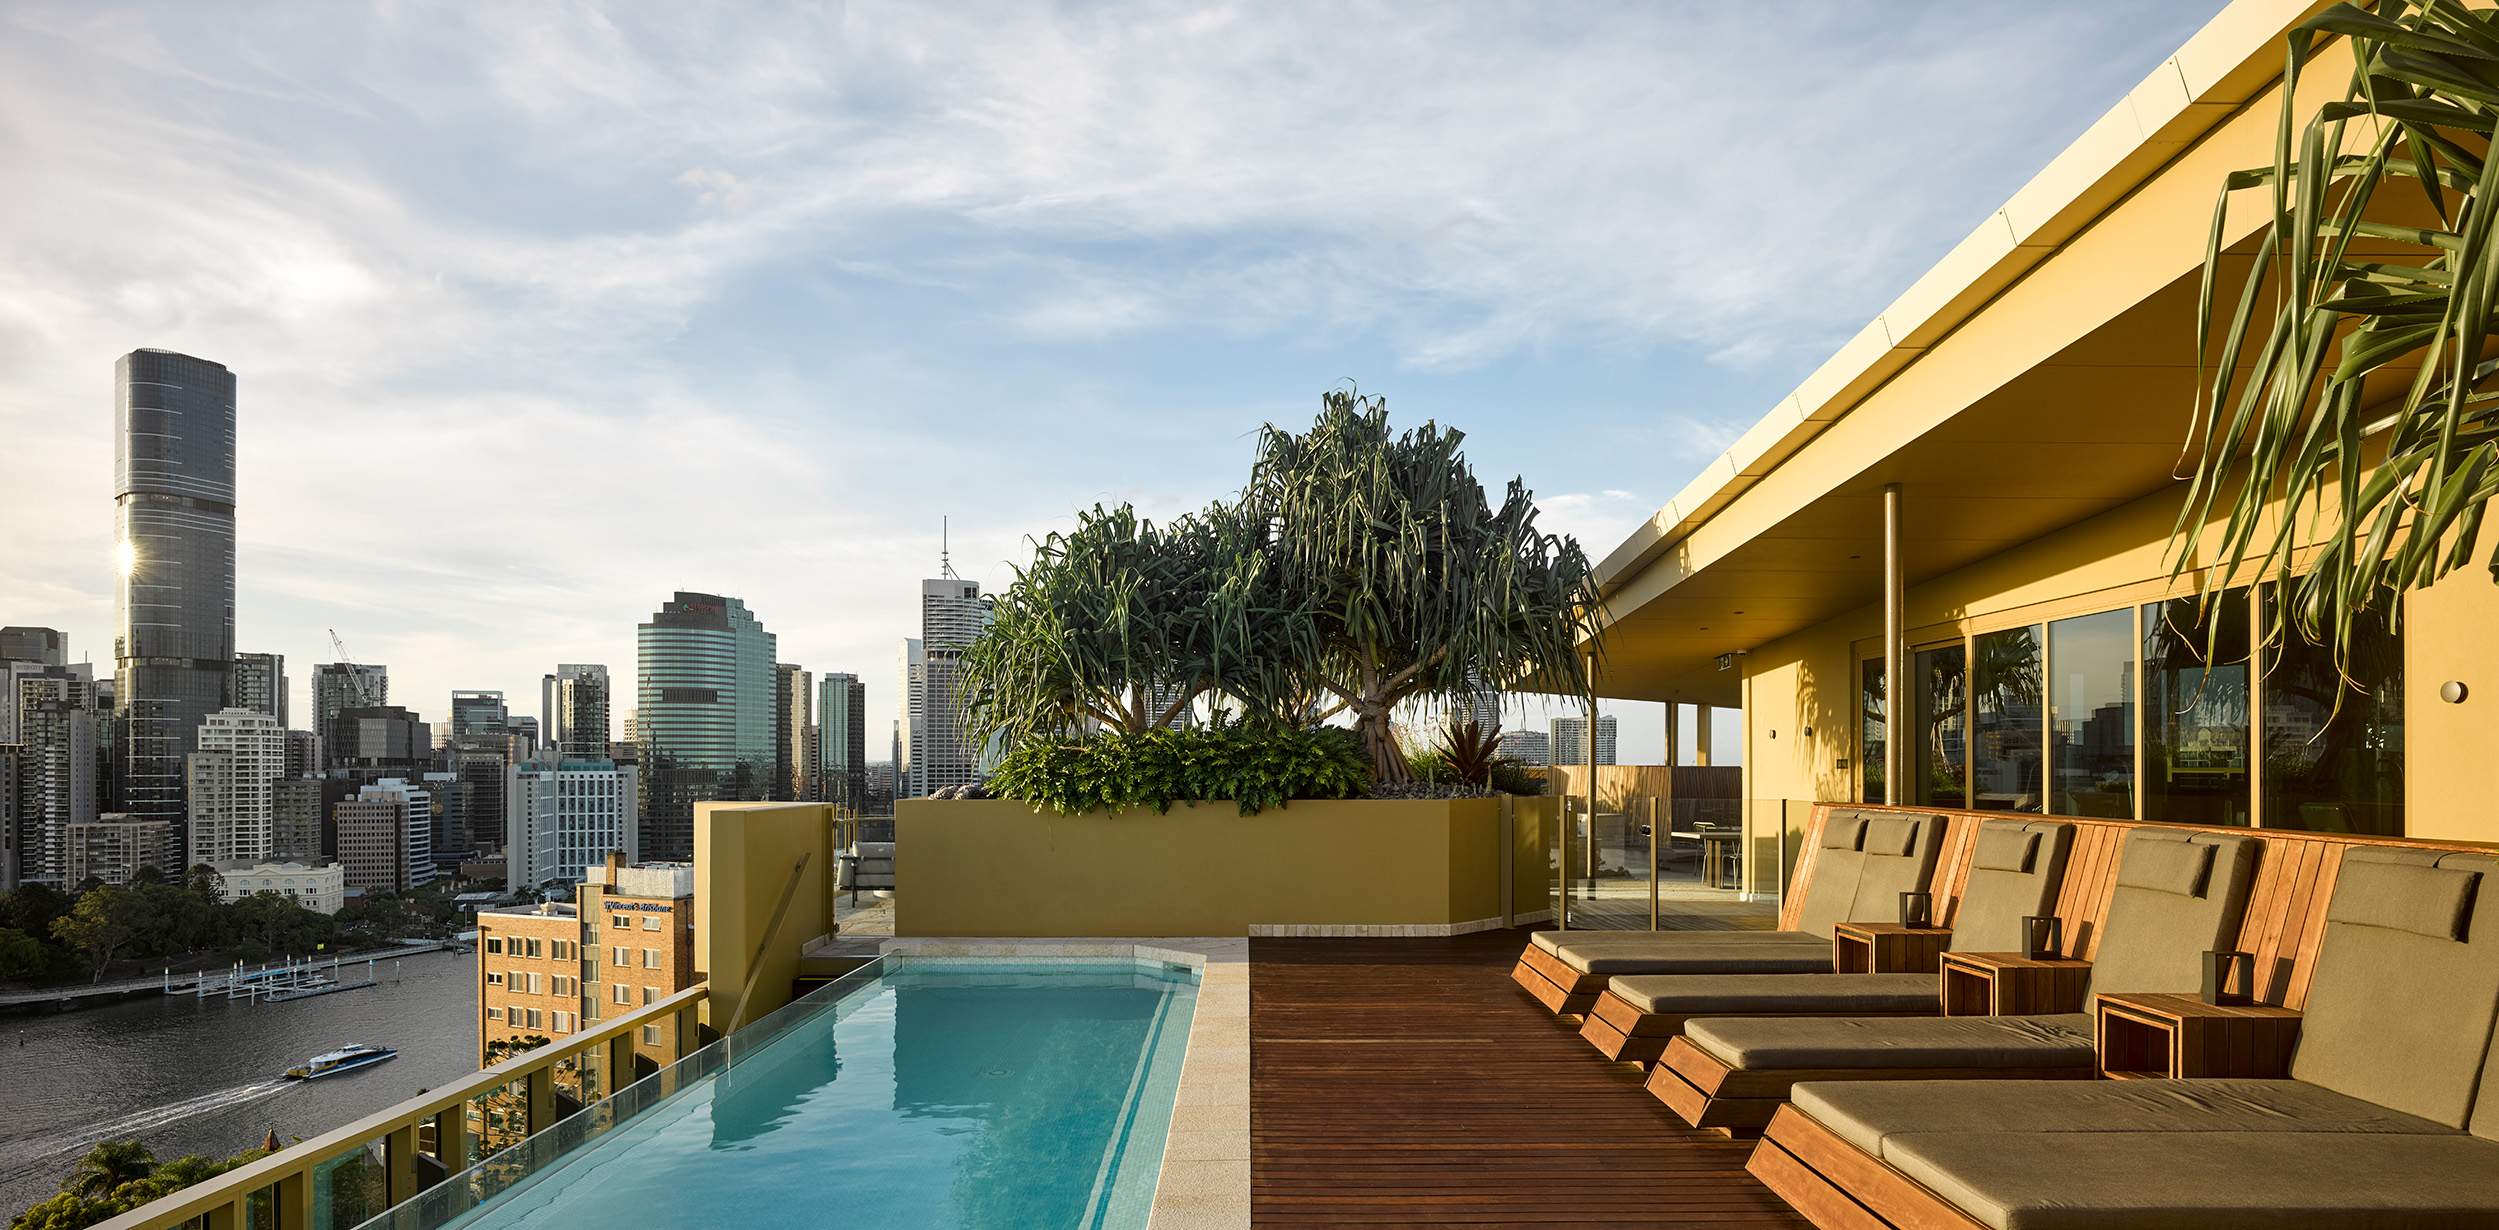 Breathtaking sunset view from a high-rise rooftop infinity pool, offering a stunning panorama of the Brisbane city skyline. The space features dark timber accents and luxurious gold color finishes. Abundant greenery and planting add a touch of natural beauty, creating a premium and serene atmosphere.